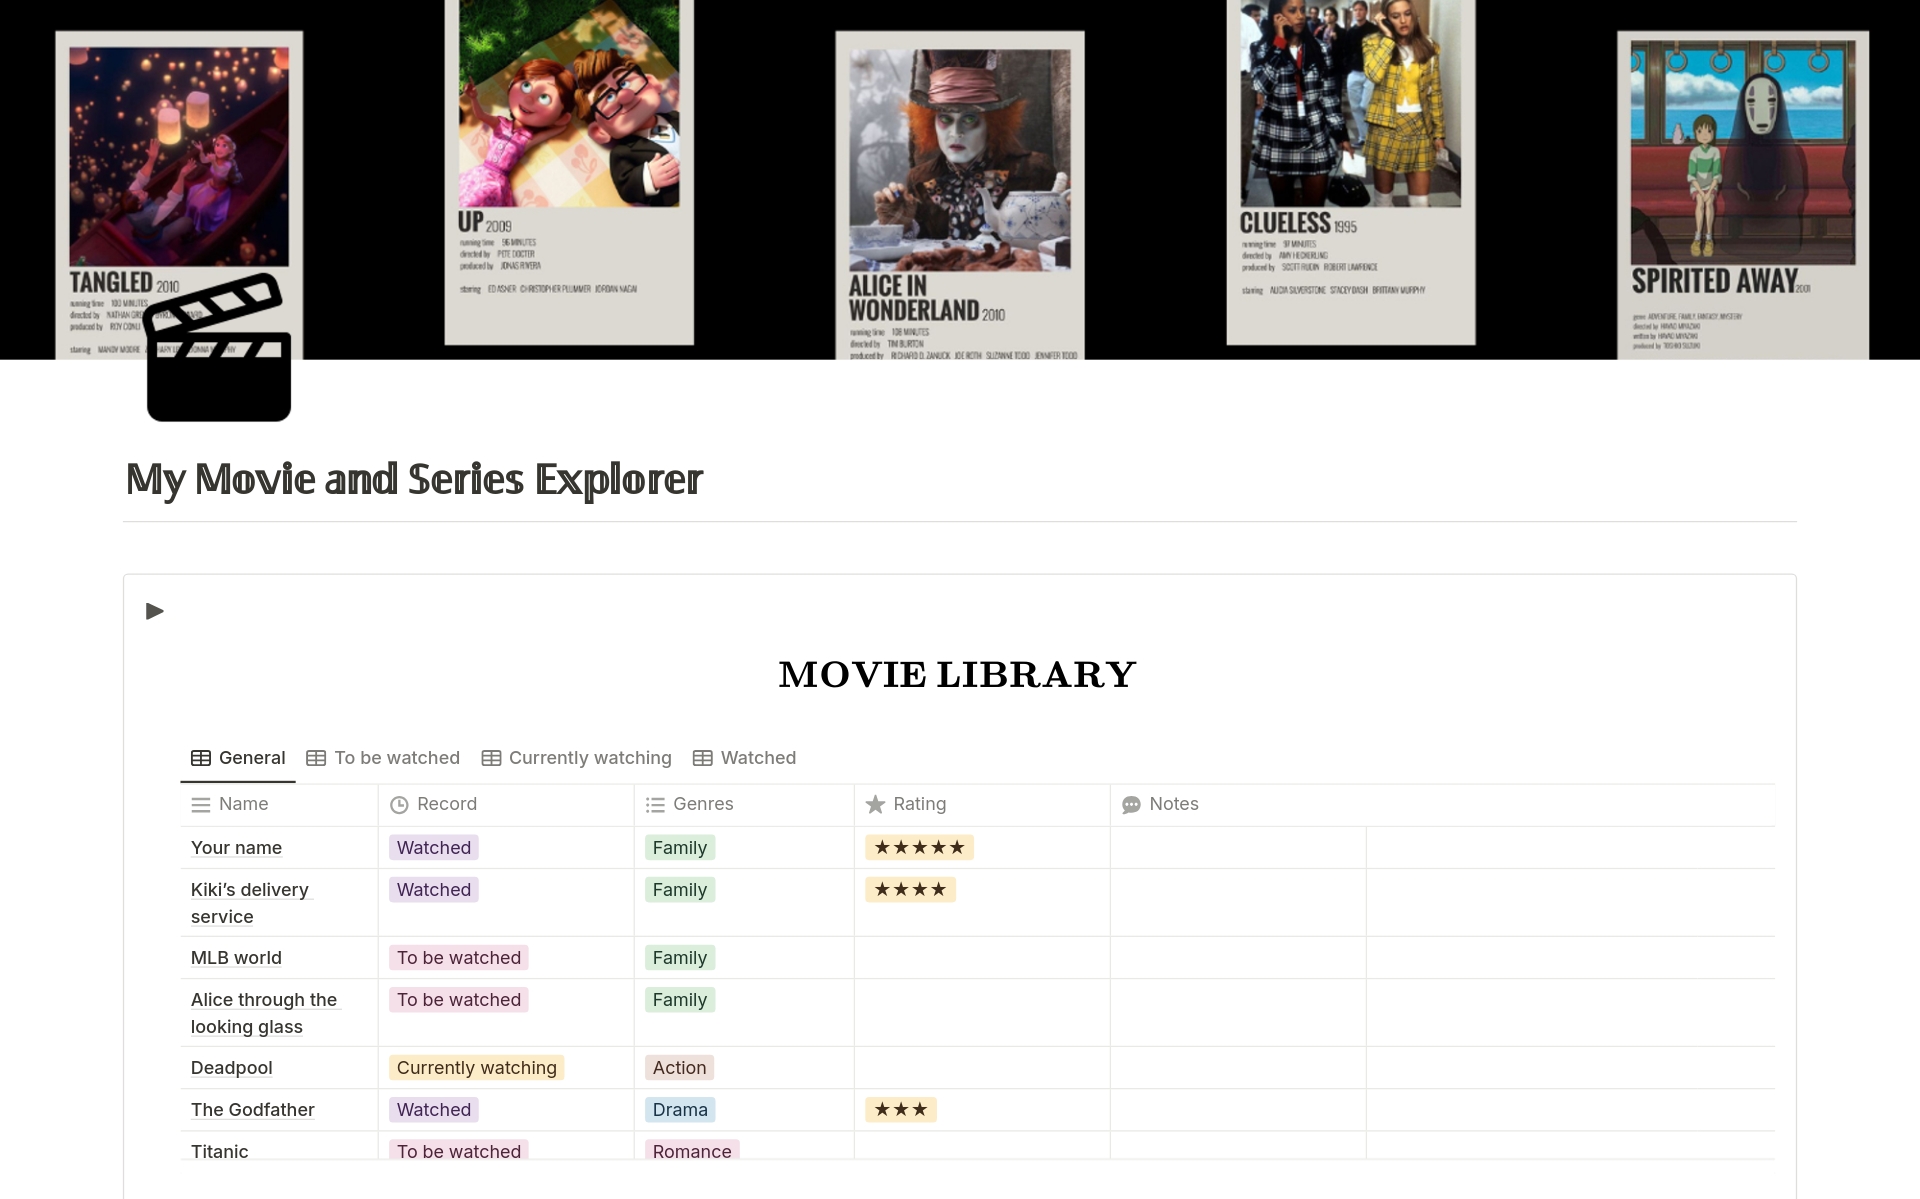 Introducing My Movie and Series Explorer: a comprehensive and interactive digital solution designed for movie and TV enthusiasts! Whether you are a casual viewer or a dedicated cinephile, this template is perfect for organizing and rating everything you watch. 